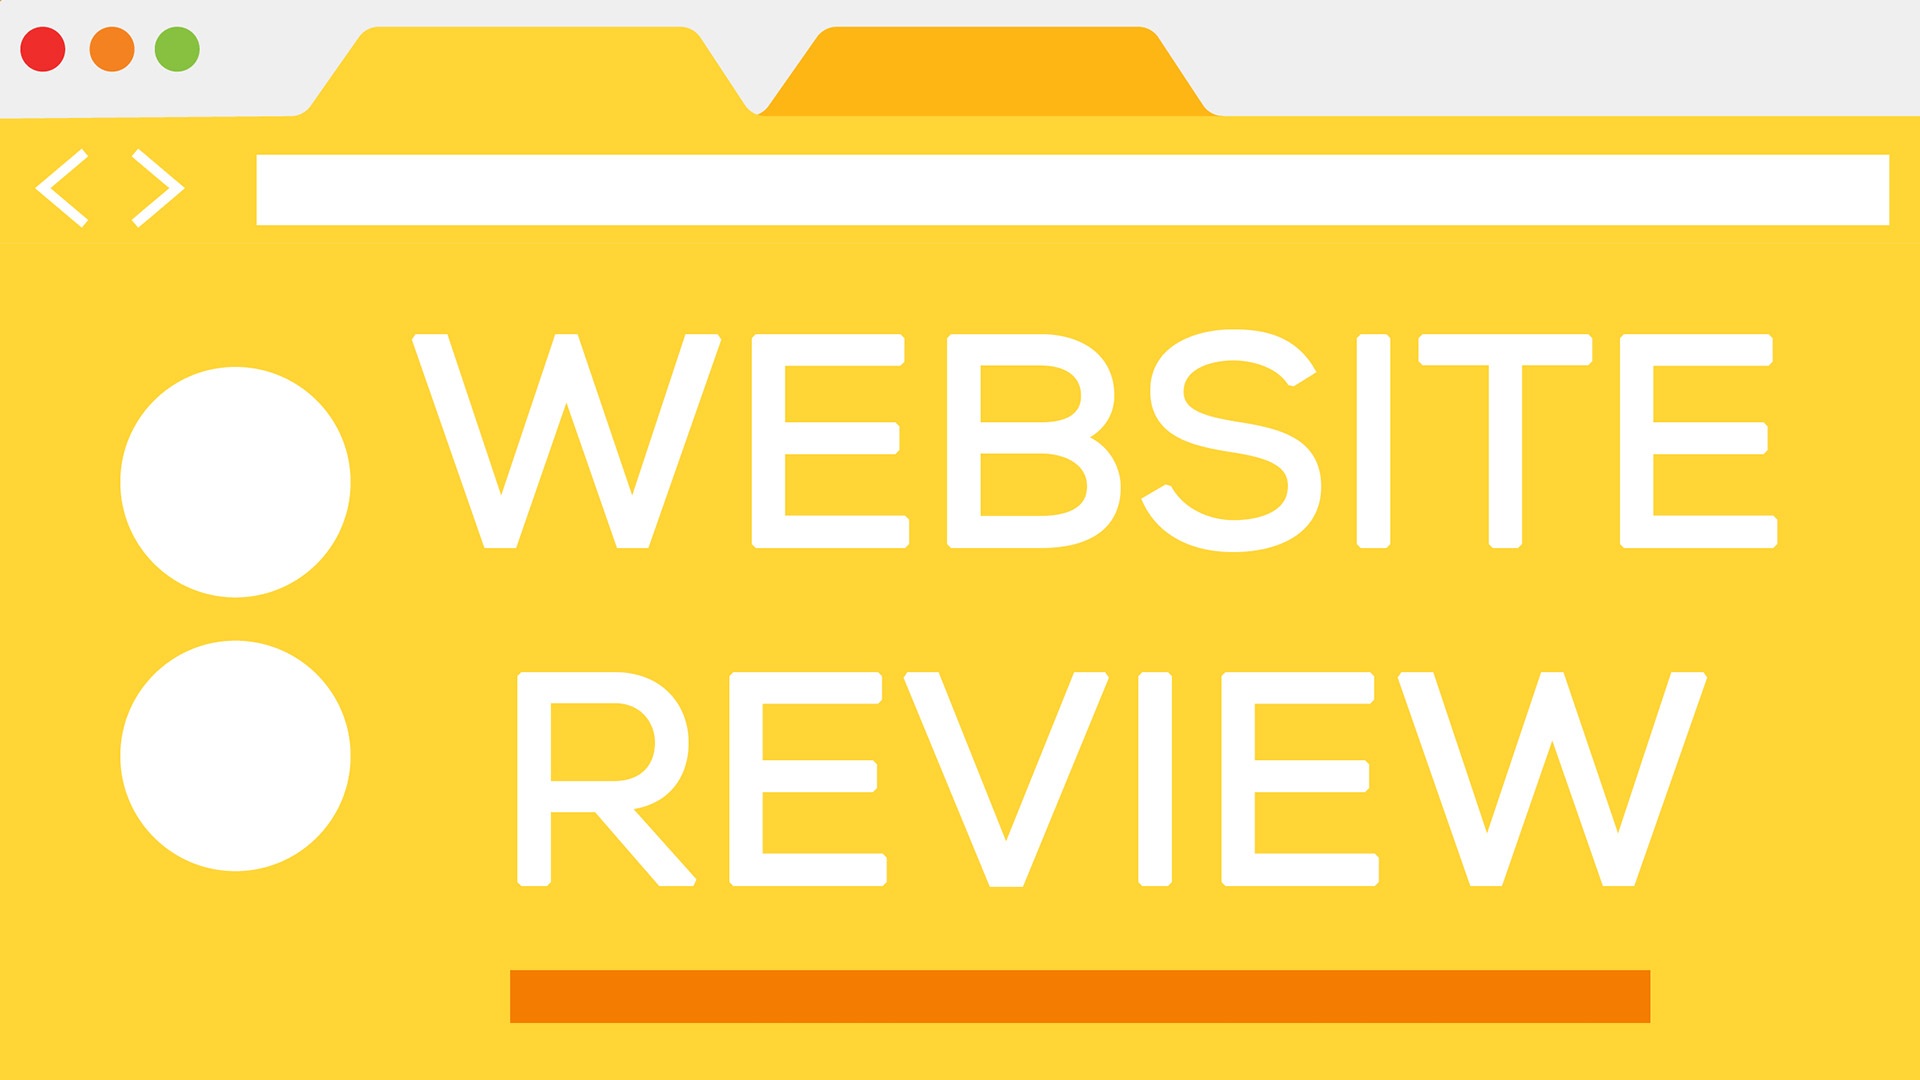 Field Service Website Review – How to Improve Your Website